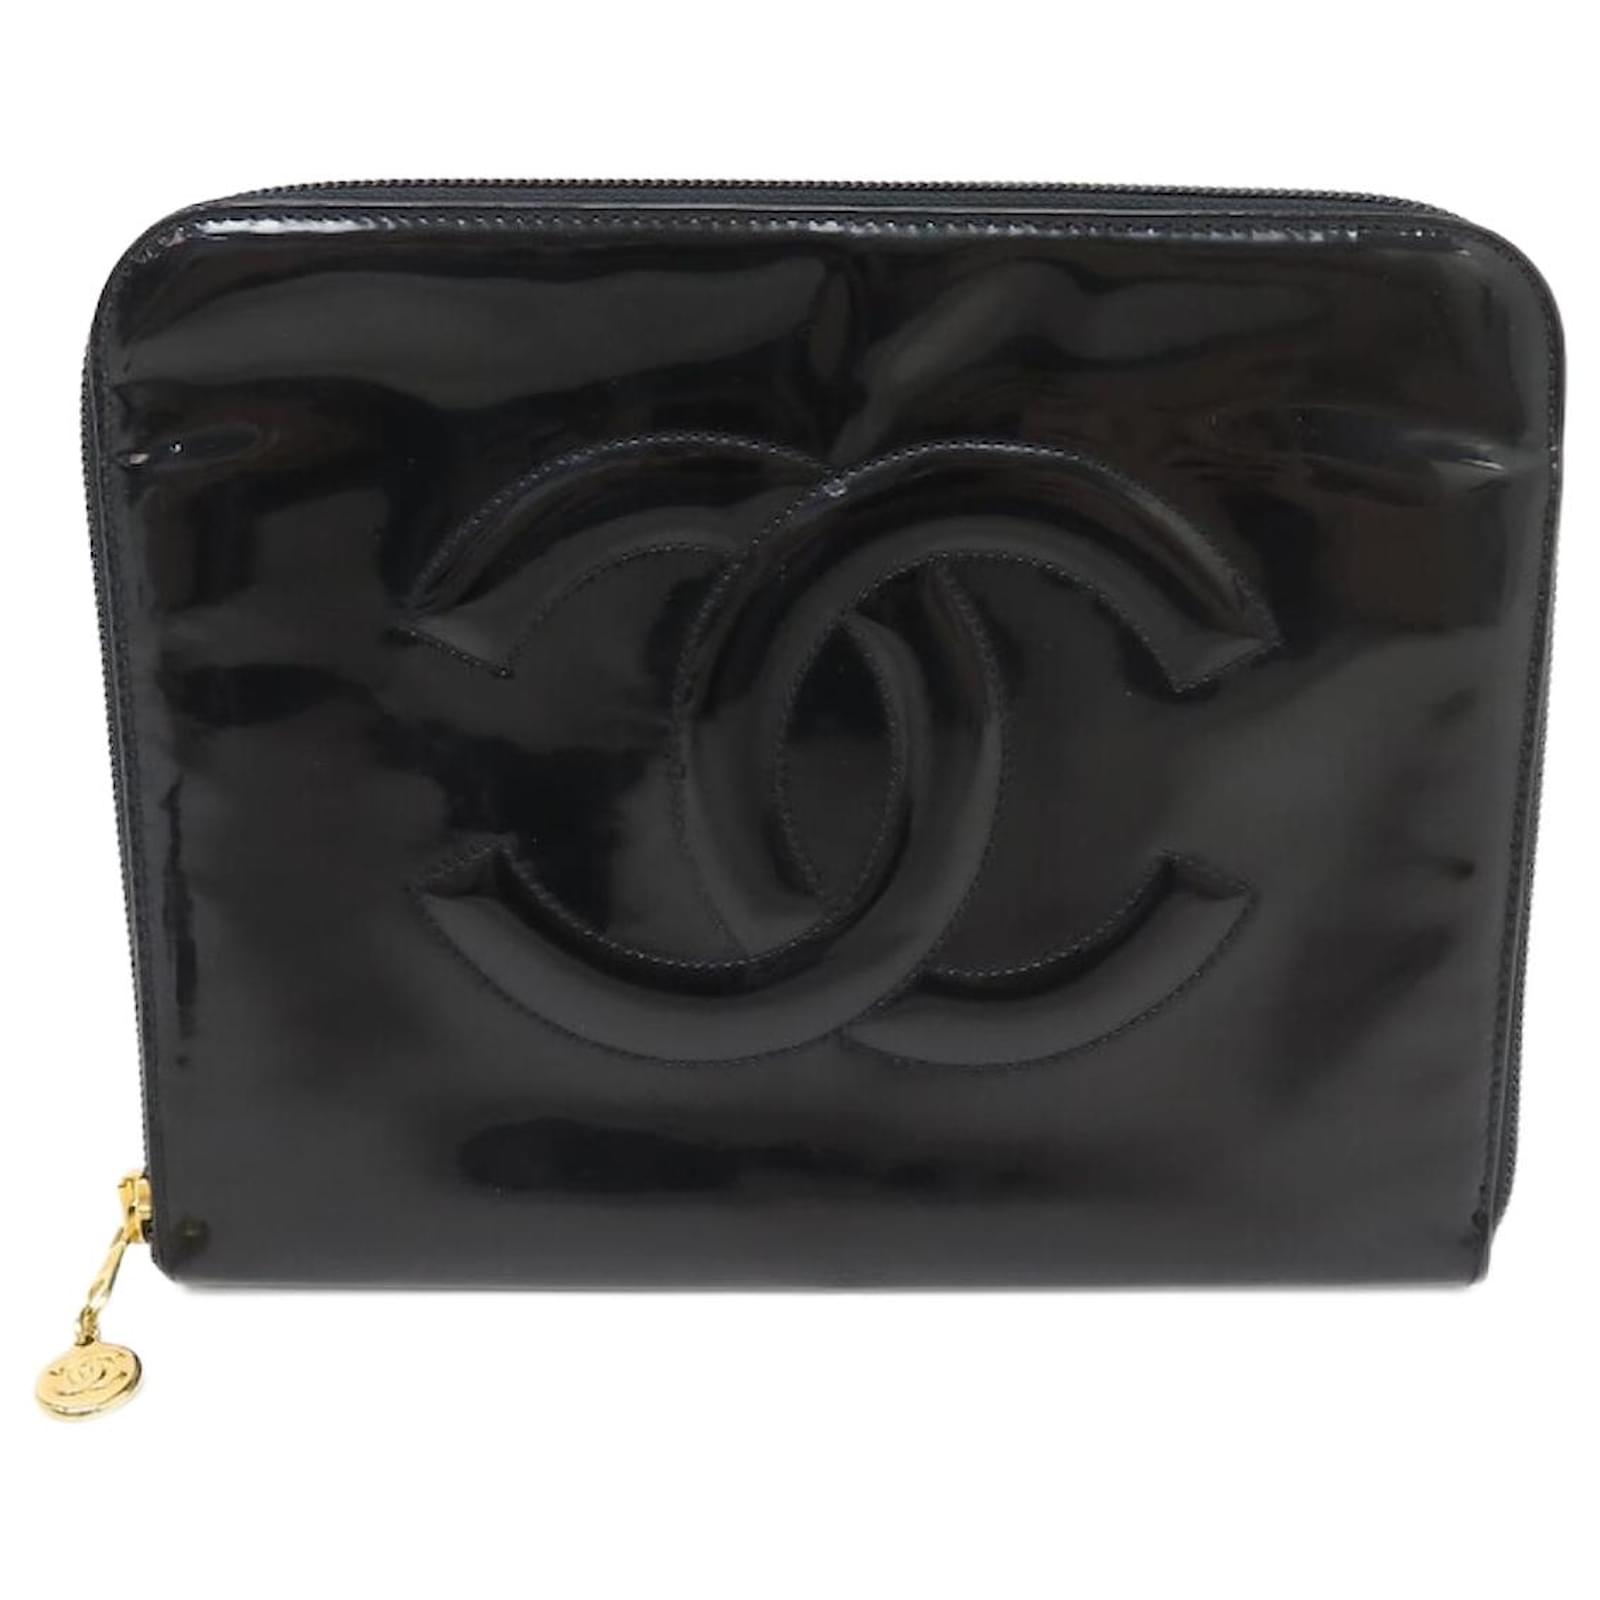 Clutch Bags Chanel Vintage Pouch Chanel Logo CC Black Patent Leather Black Leather Pouch Clutch